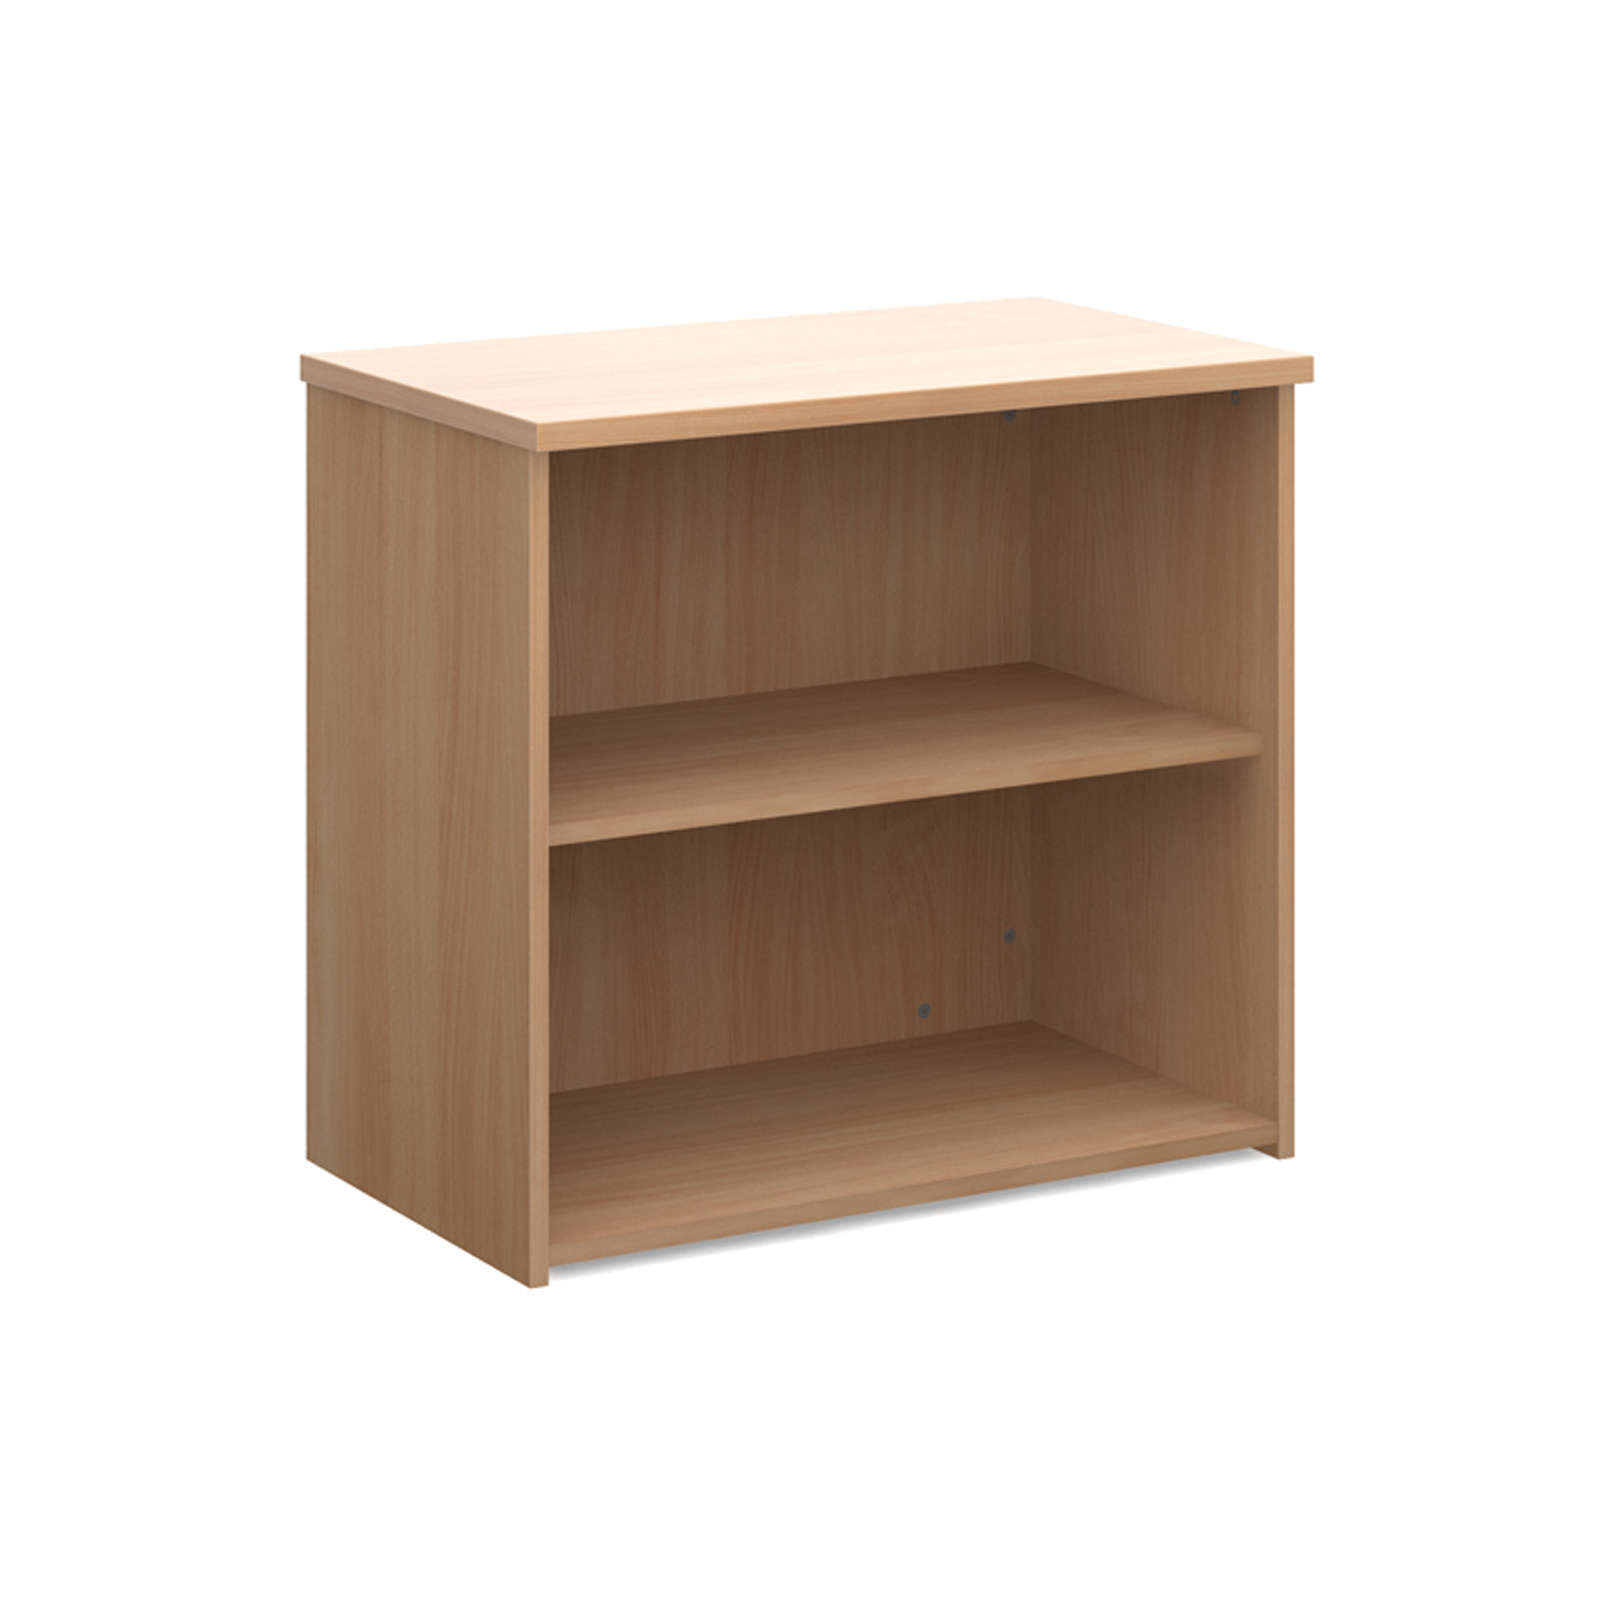 Up To 1200mm High Universal bookcase 740mm high with 1 shelf - beech